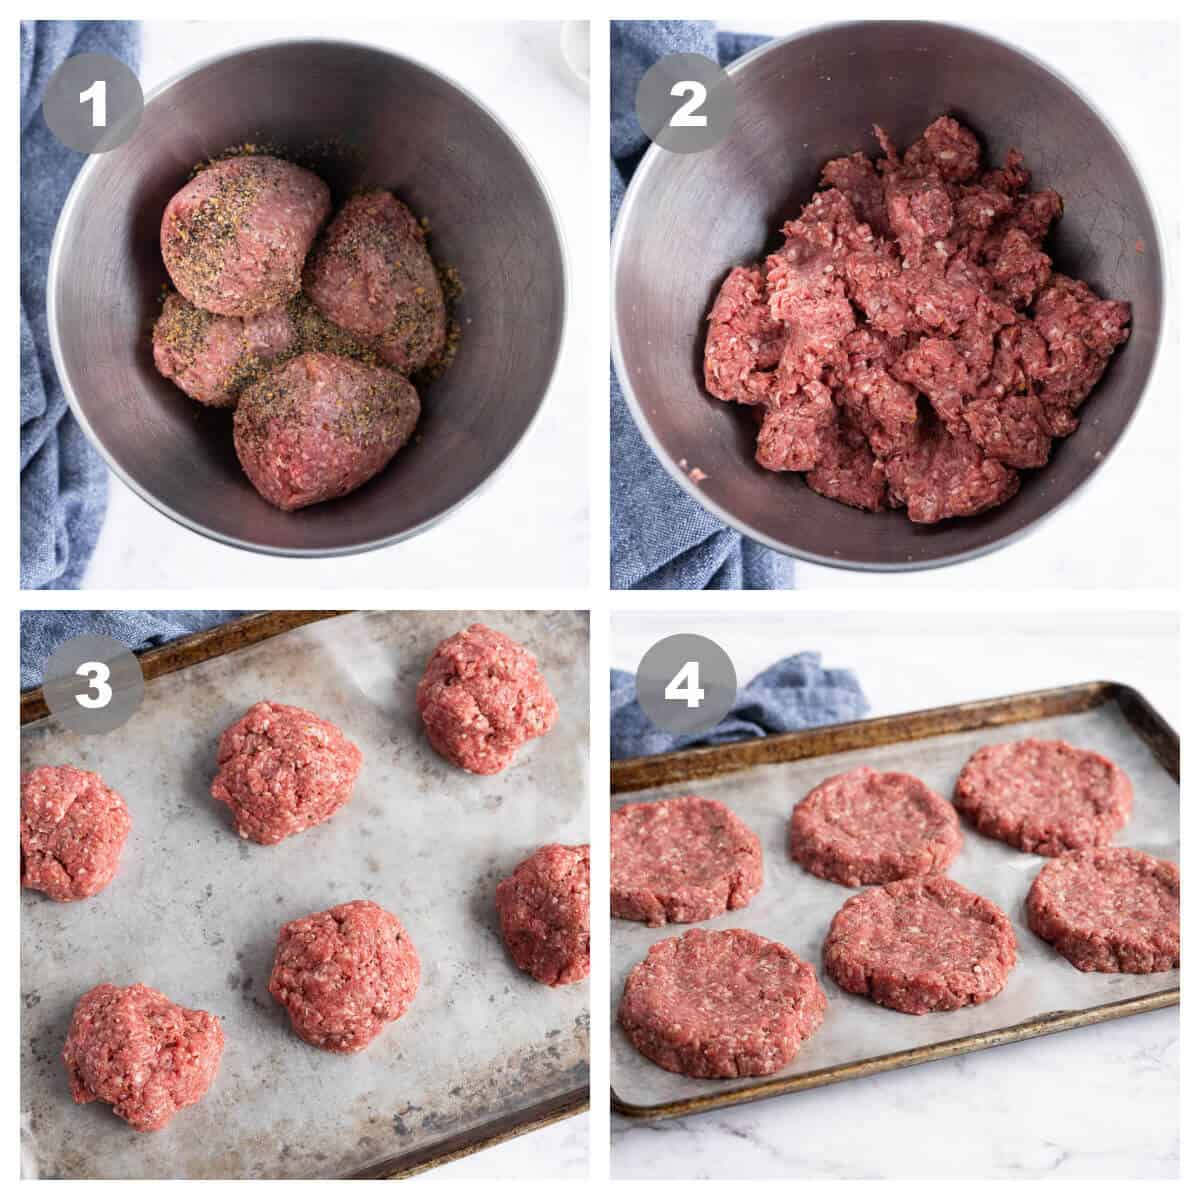 4 picture collage showing ground beef and seasonings before and after mixing, and raw meat portioned, then formed into patties